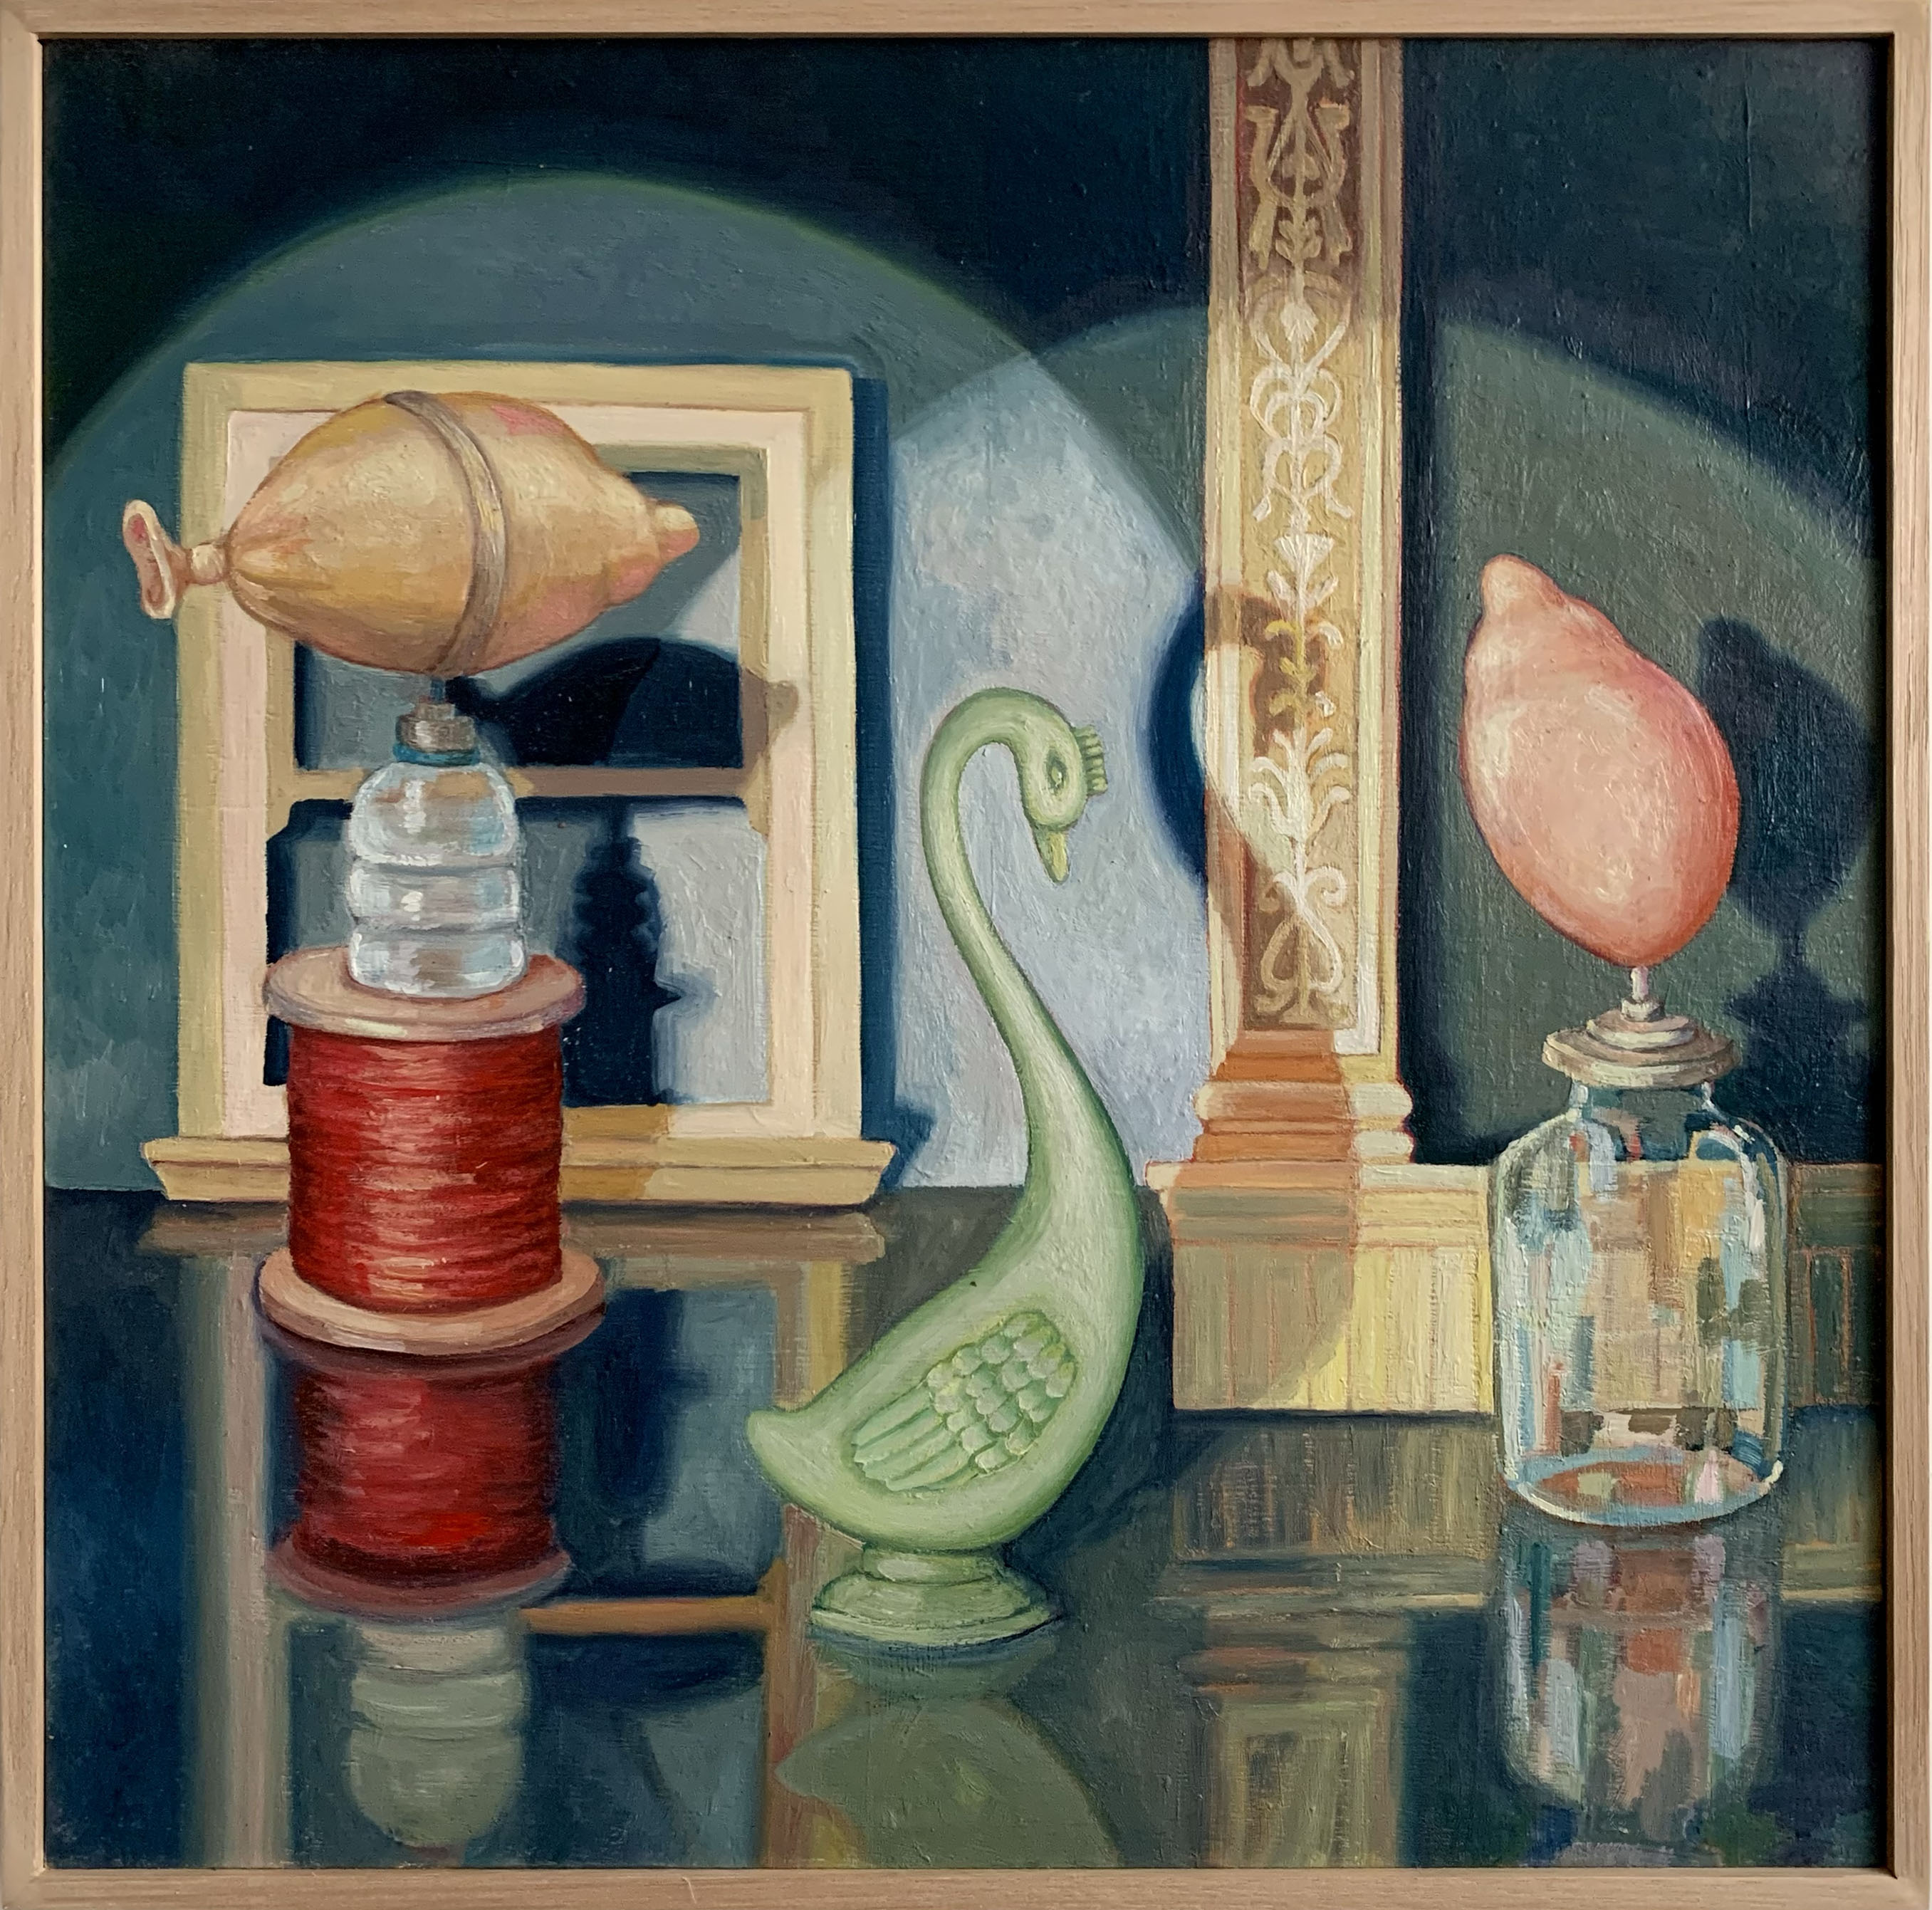 A painting of assorted objects including a spool of red thread, a glass bottle with a pink shell on top, a light green swan figurine and two yellow coloured ornate frames in the background.